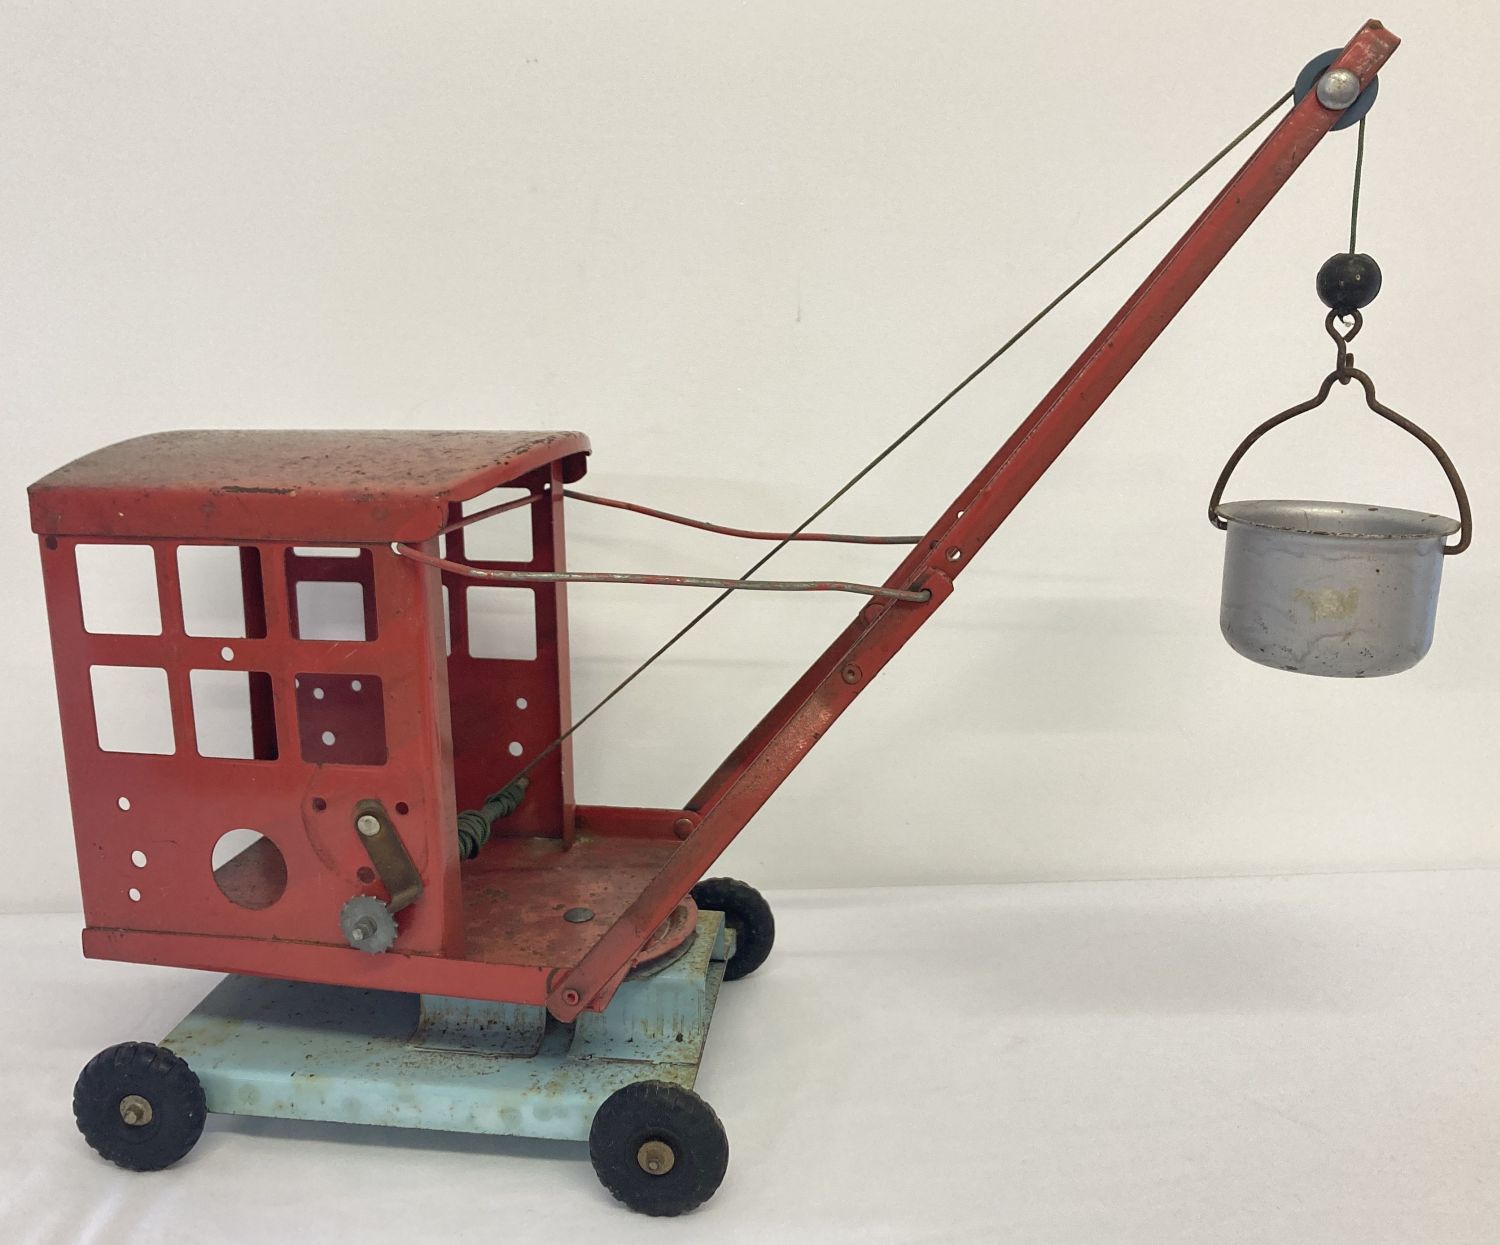 A vintage red and blue 1950's No. 2 tinplate crane with bucket and swivel base by Tri-Ang.